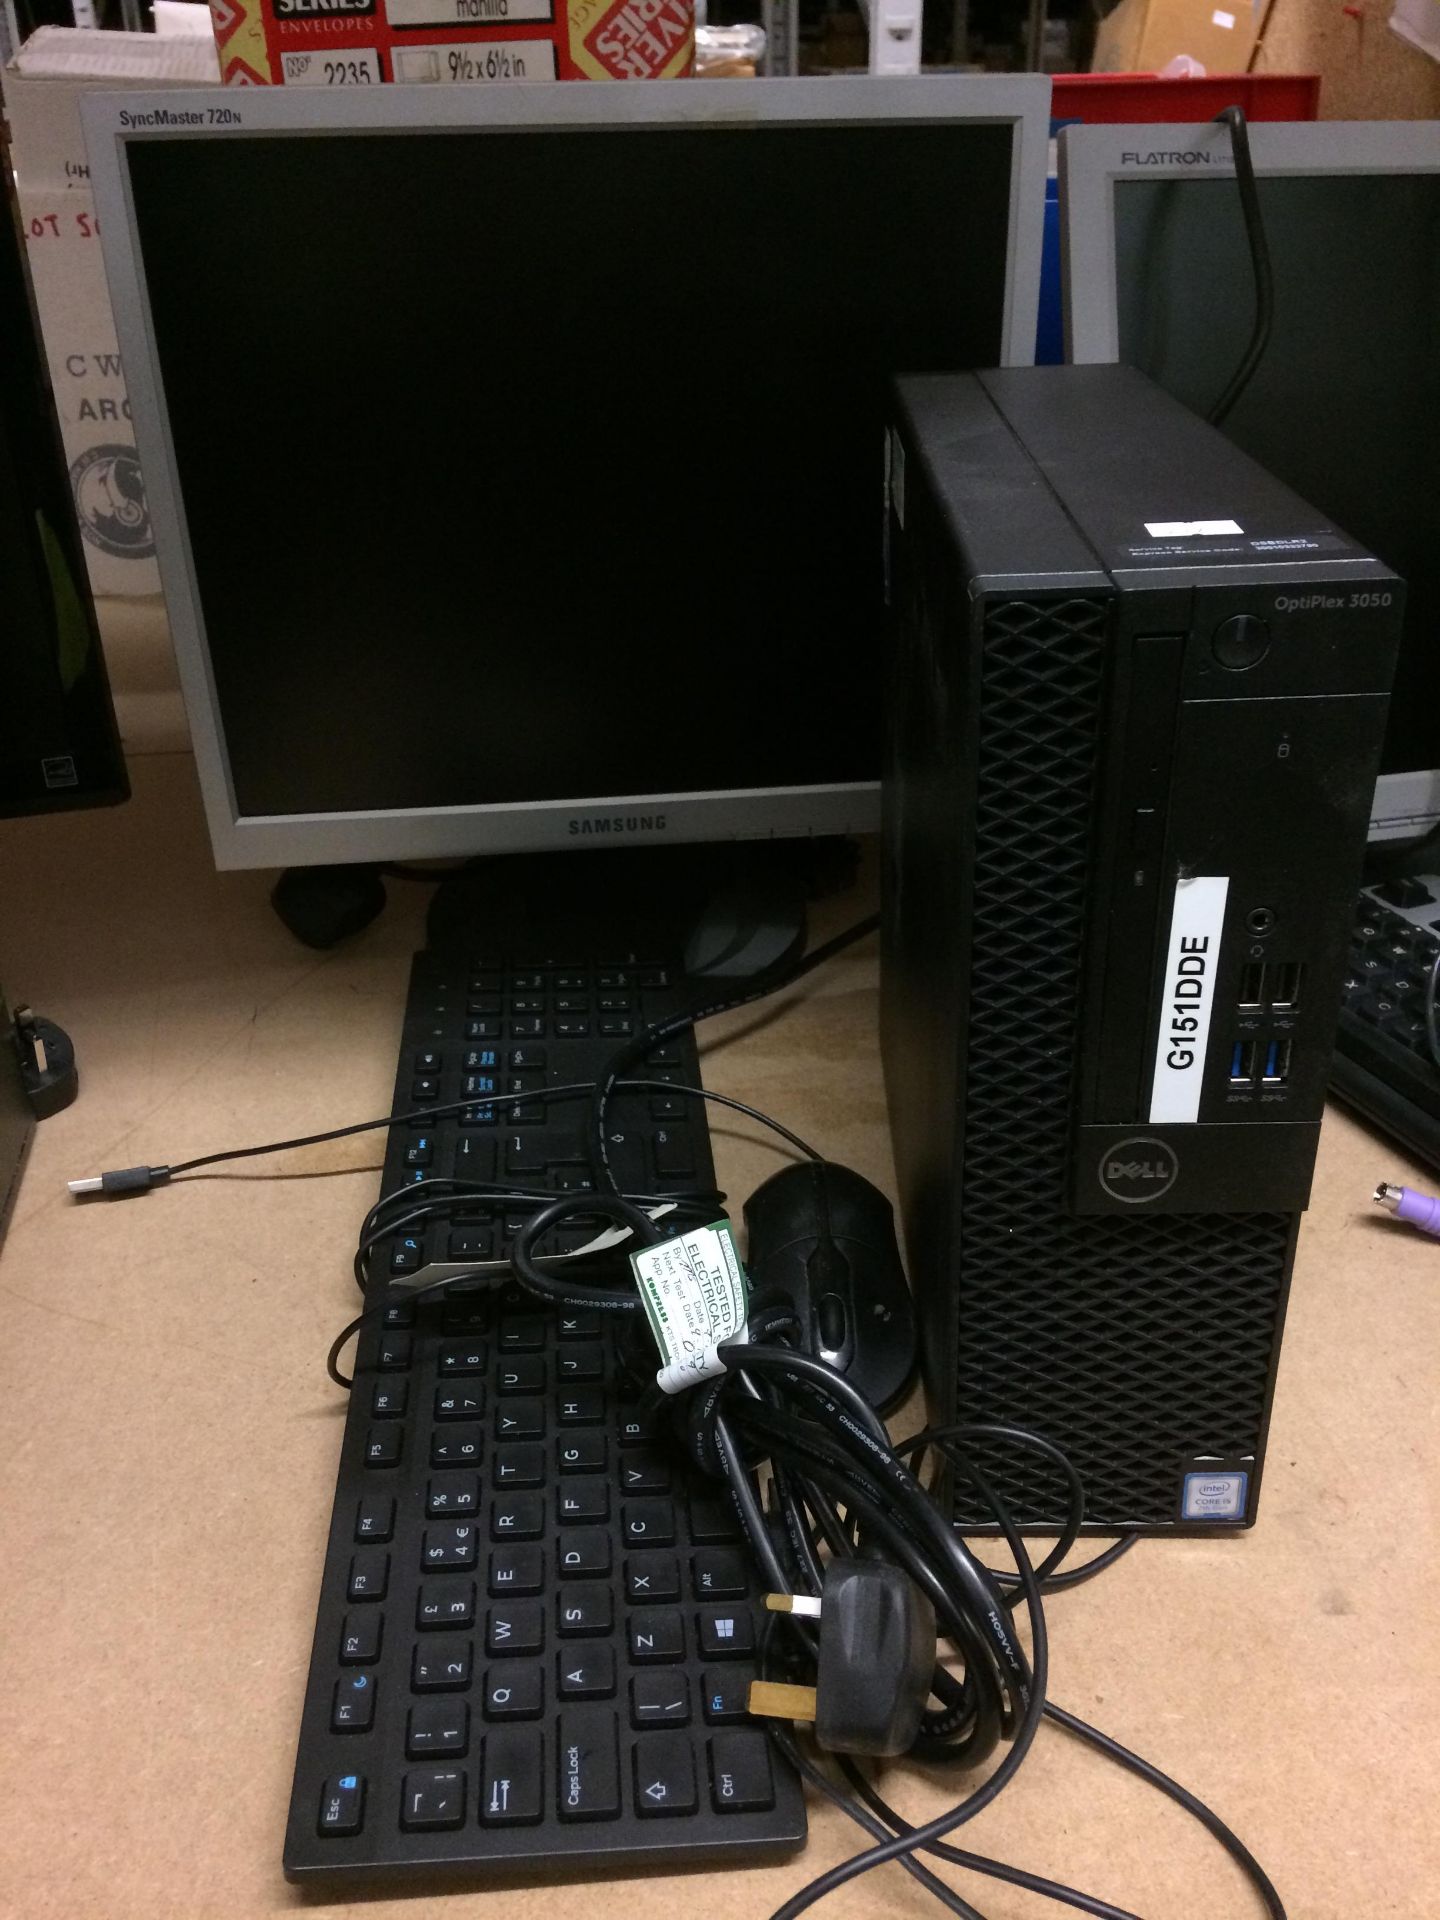 A Dell Model D11 S personal computer complete with Samsung 17" monitor,